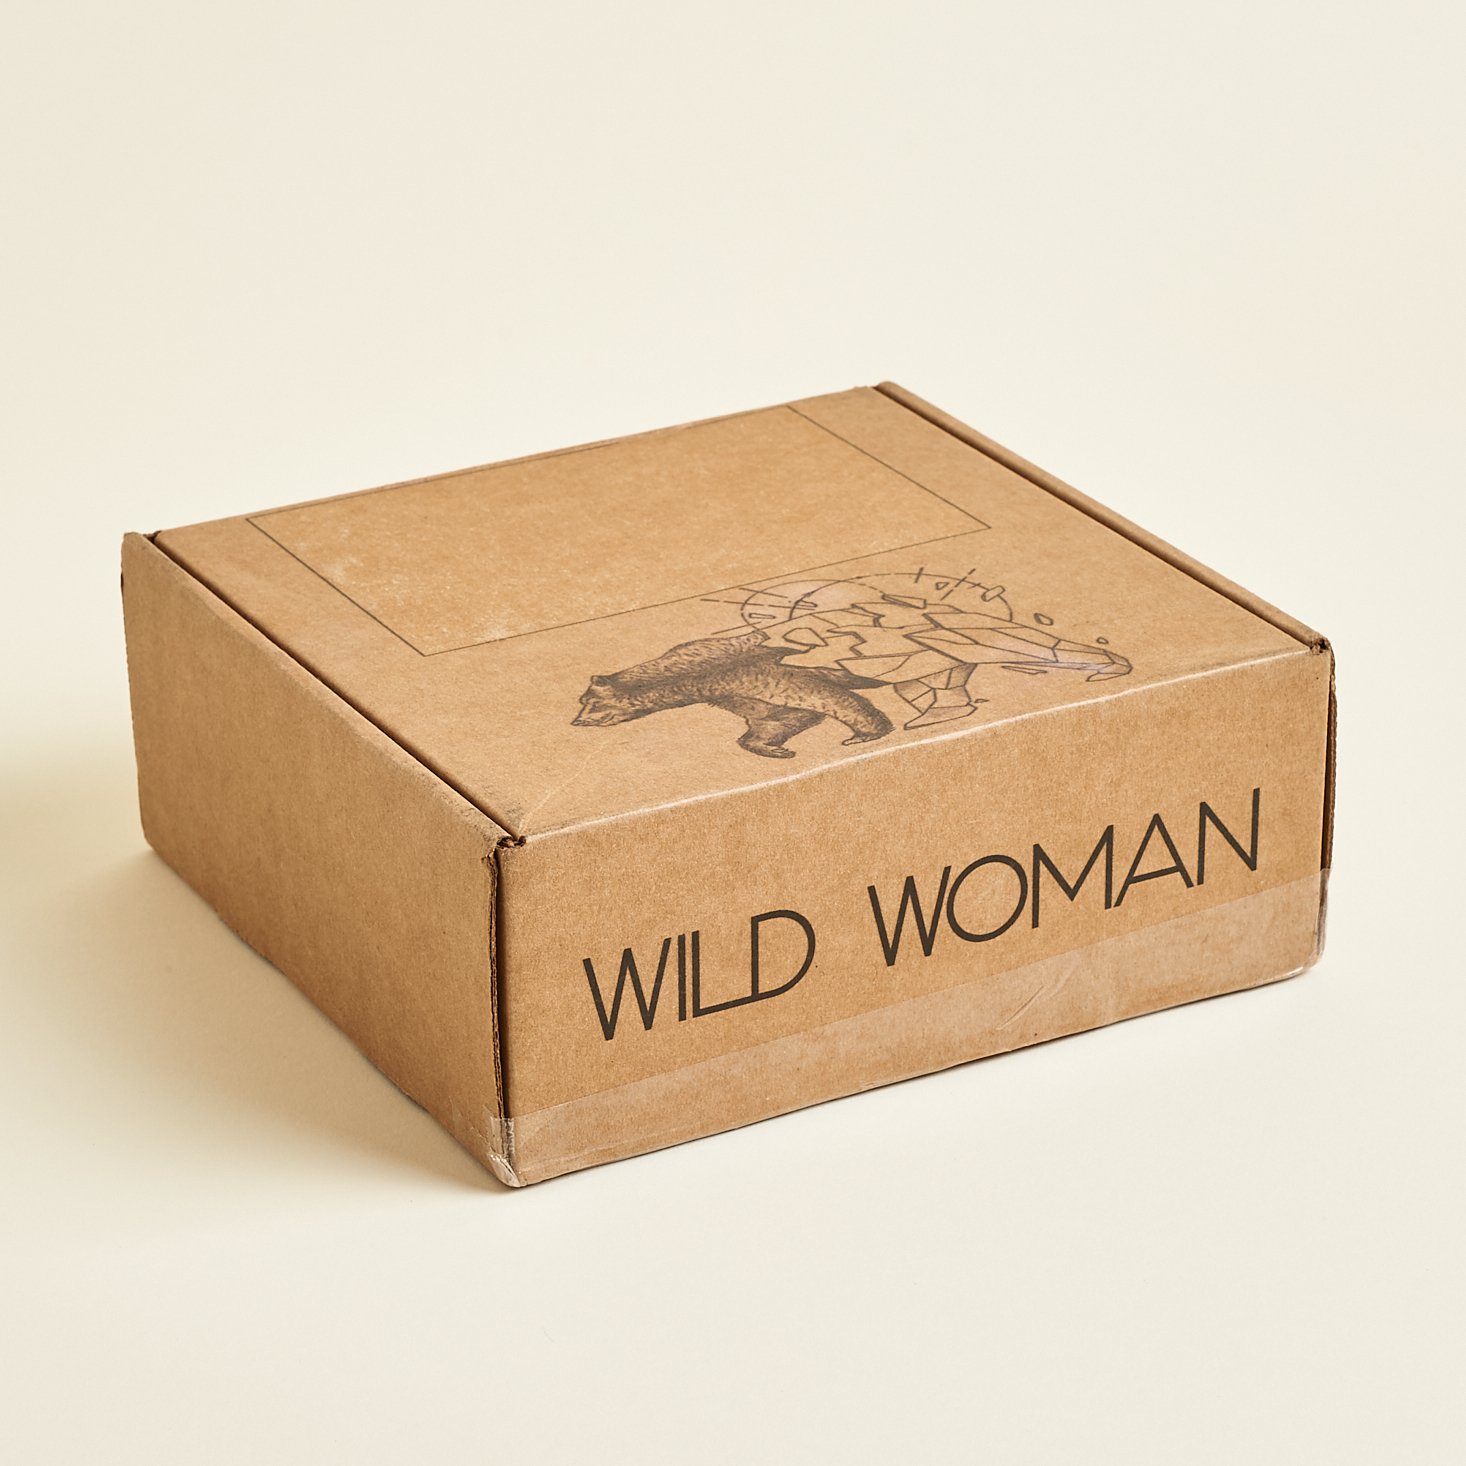 Wild Woman Box Review + Coupon – August 2020